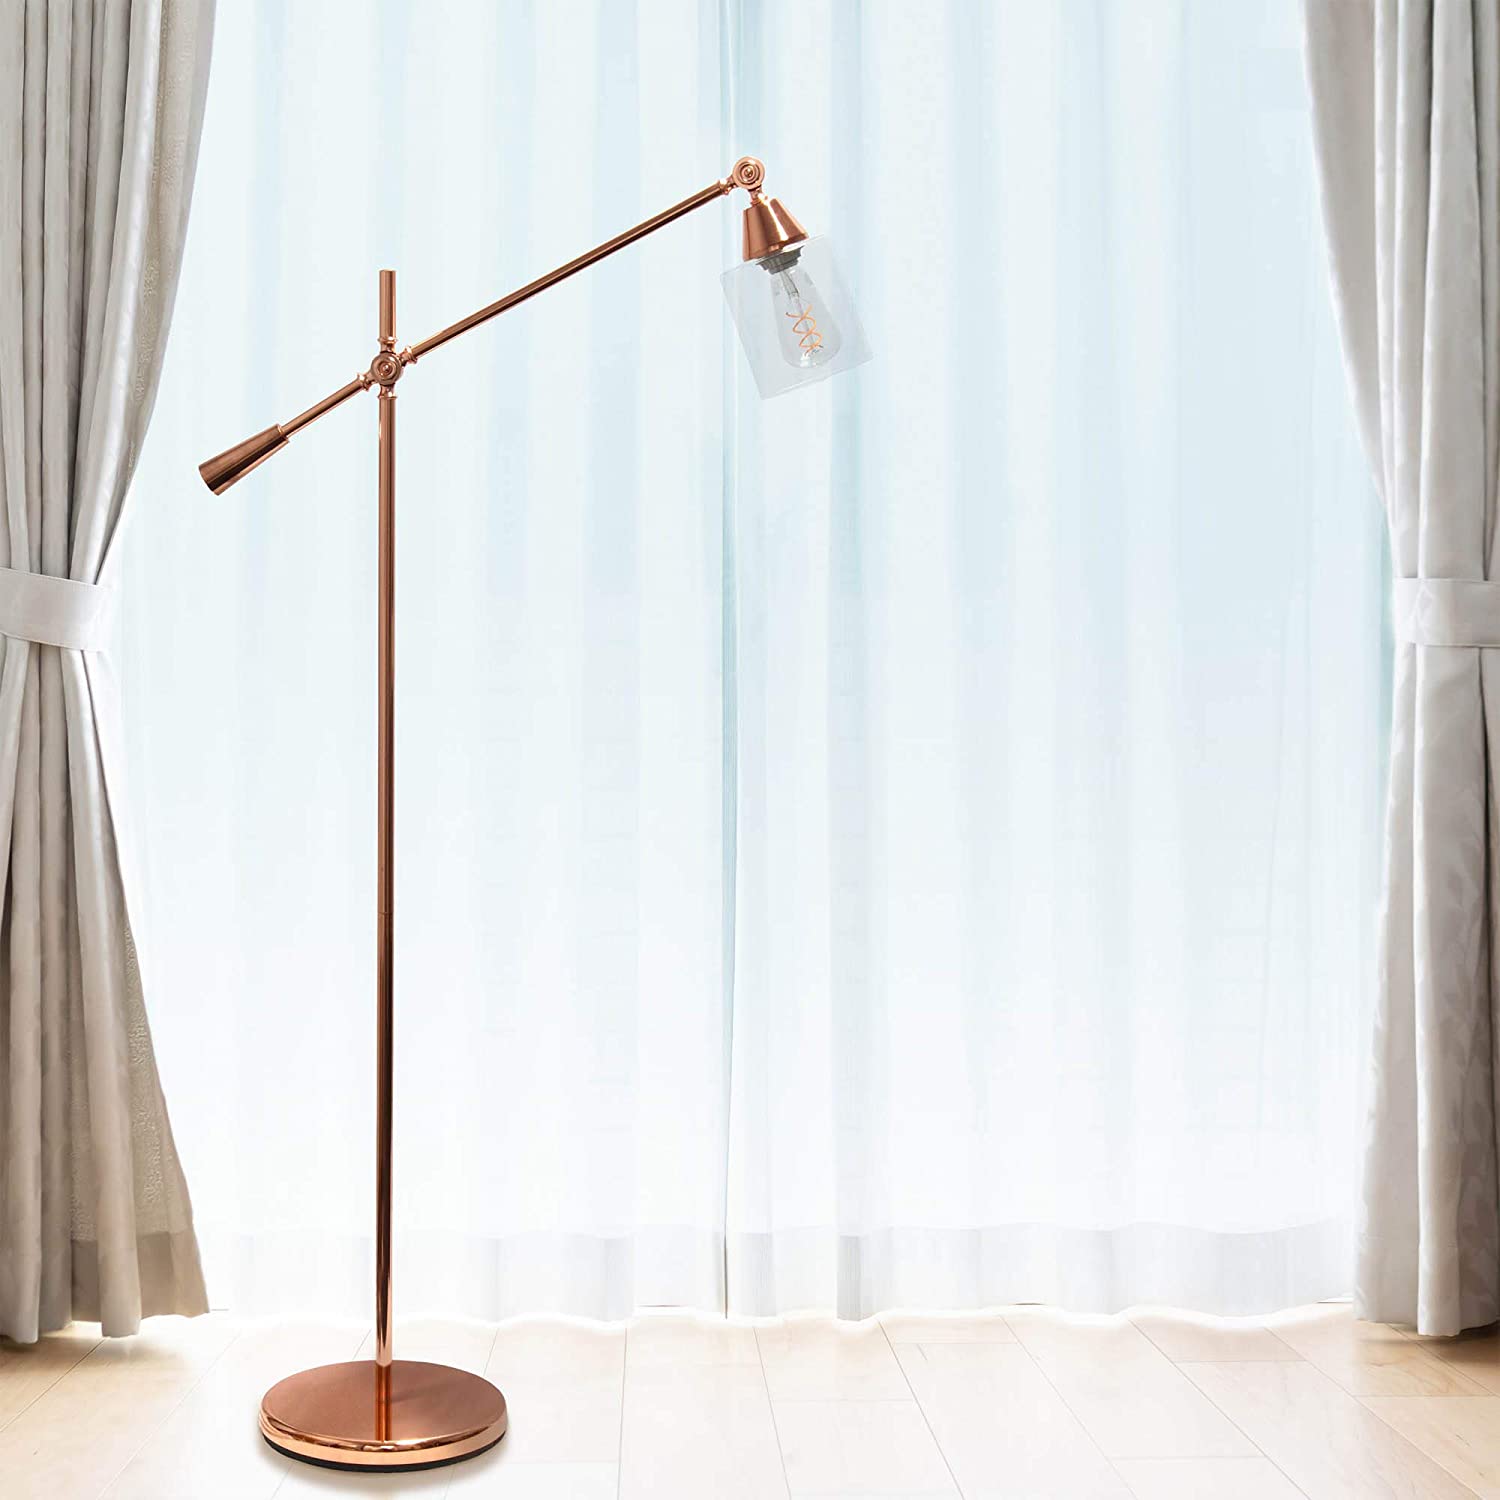 Lalia Home Decorative Swing Arm Floor Lamp with Clear Glass Cylindrical Shade, Rose Gold